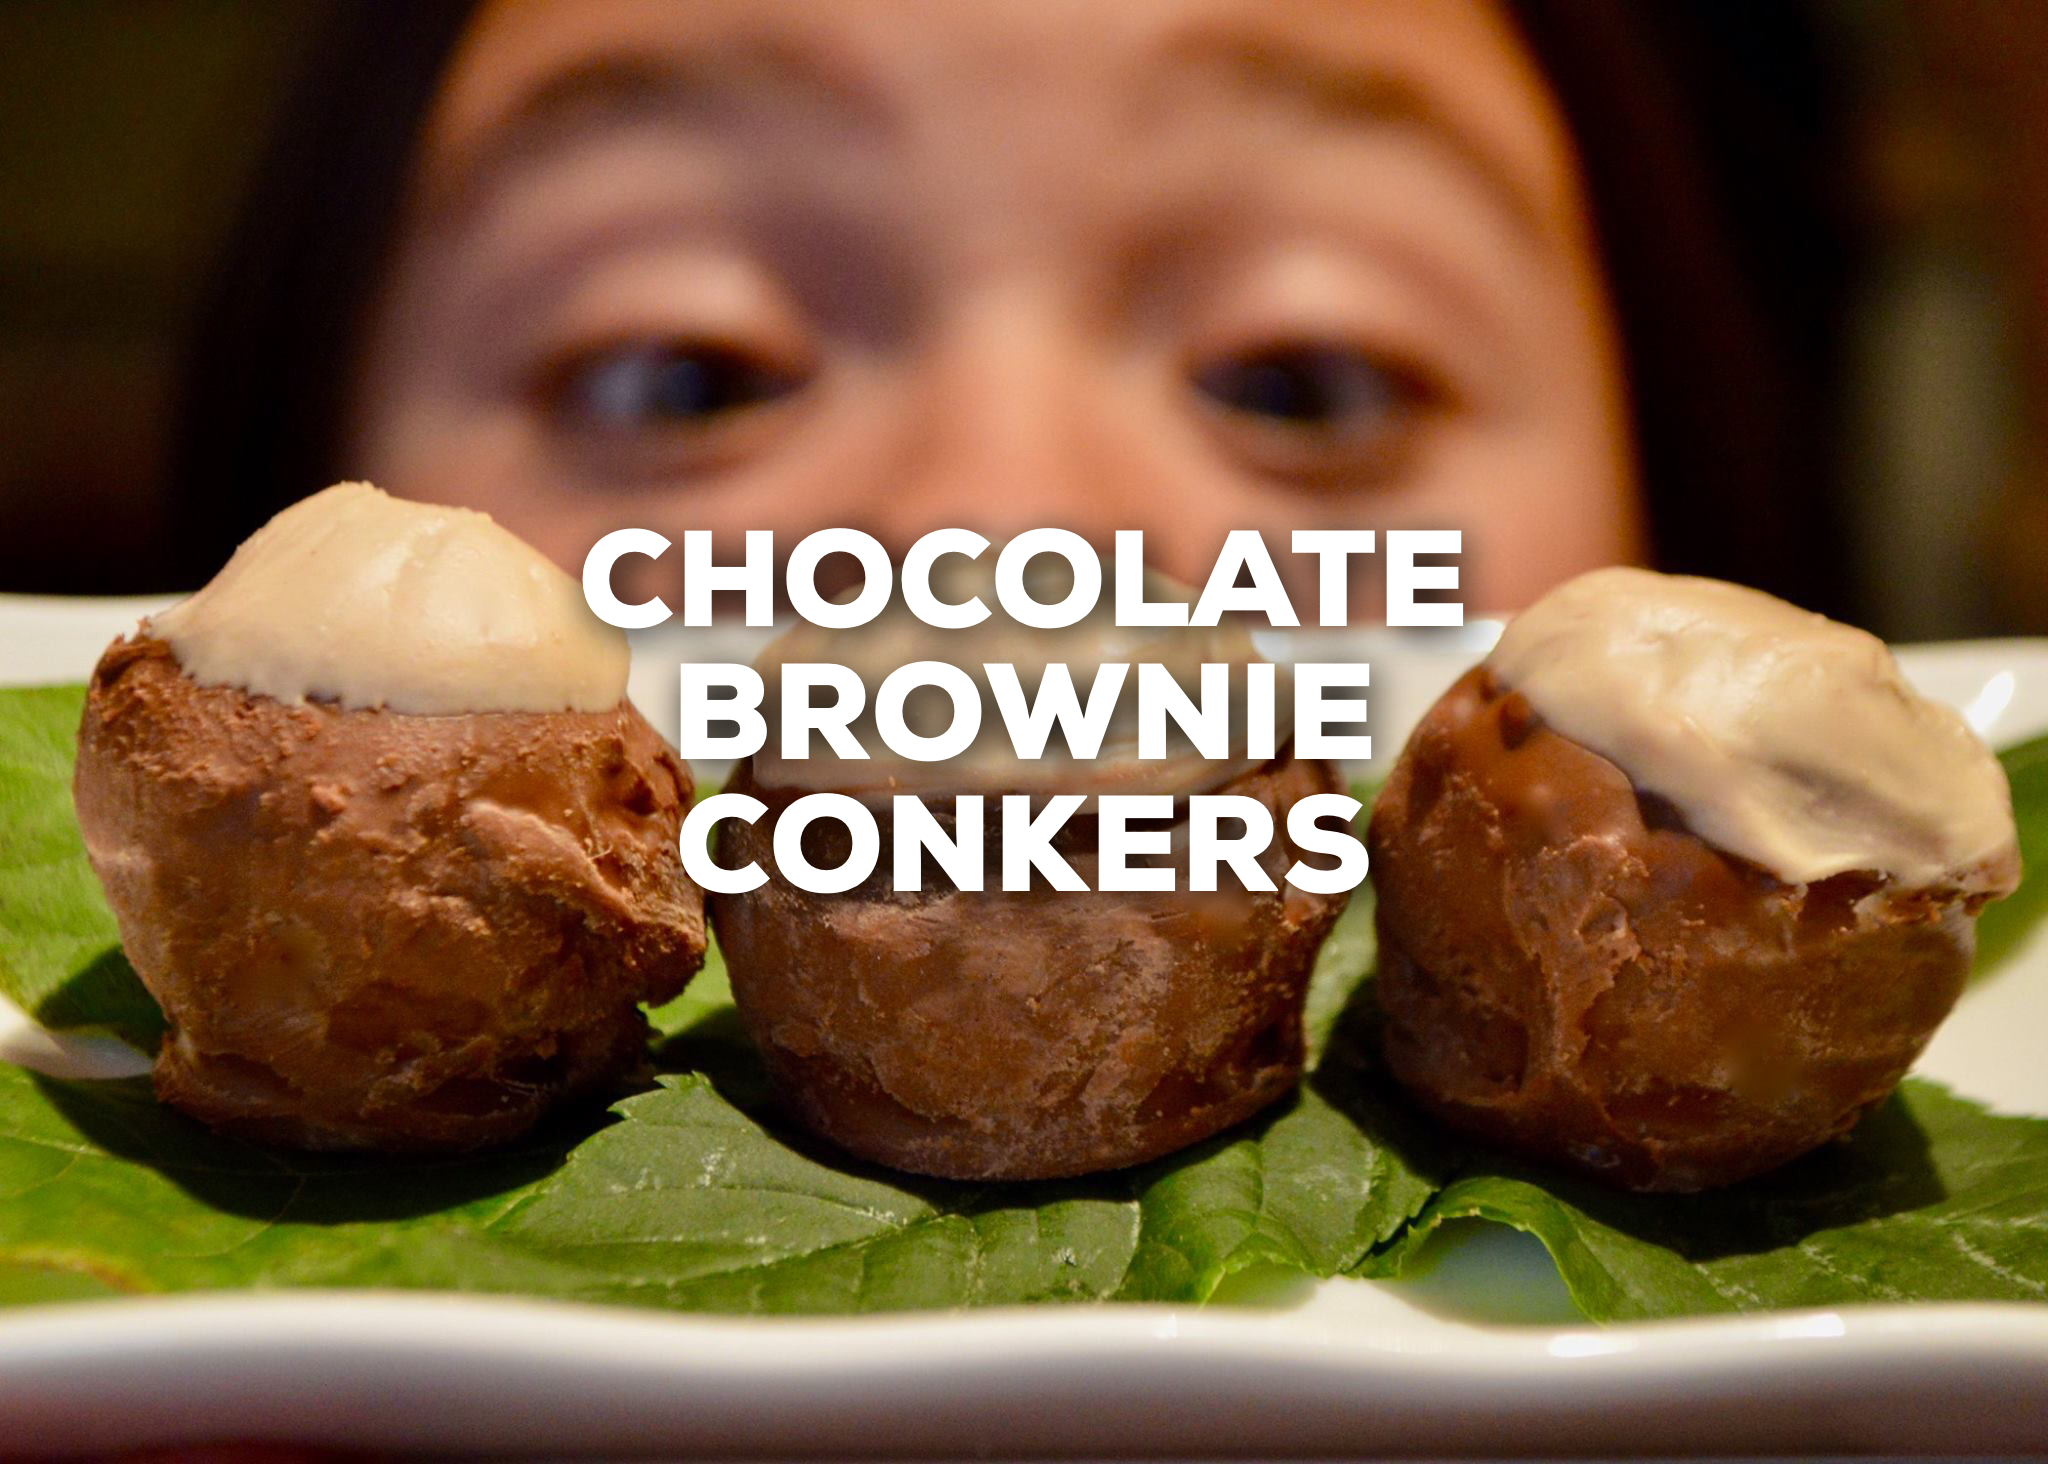 Chocolate Brownie Conkers